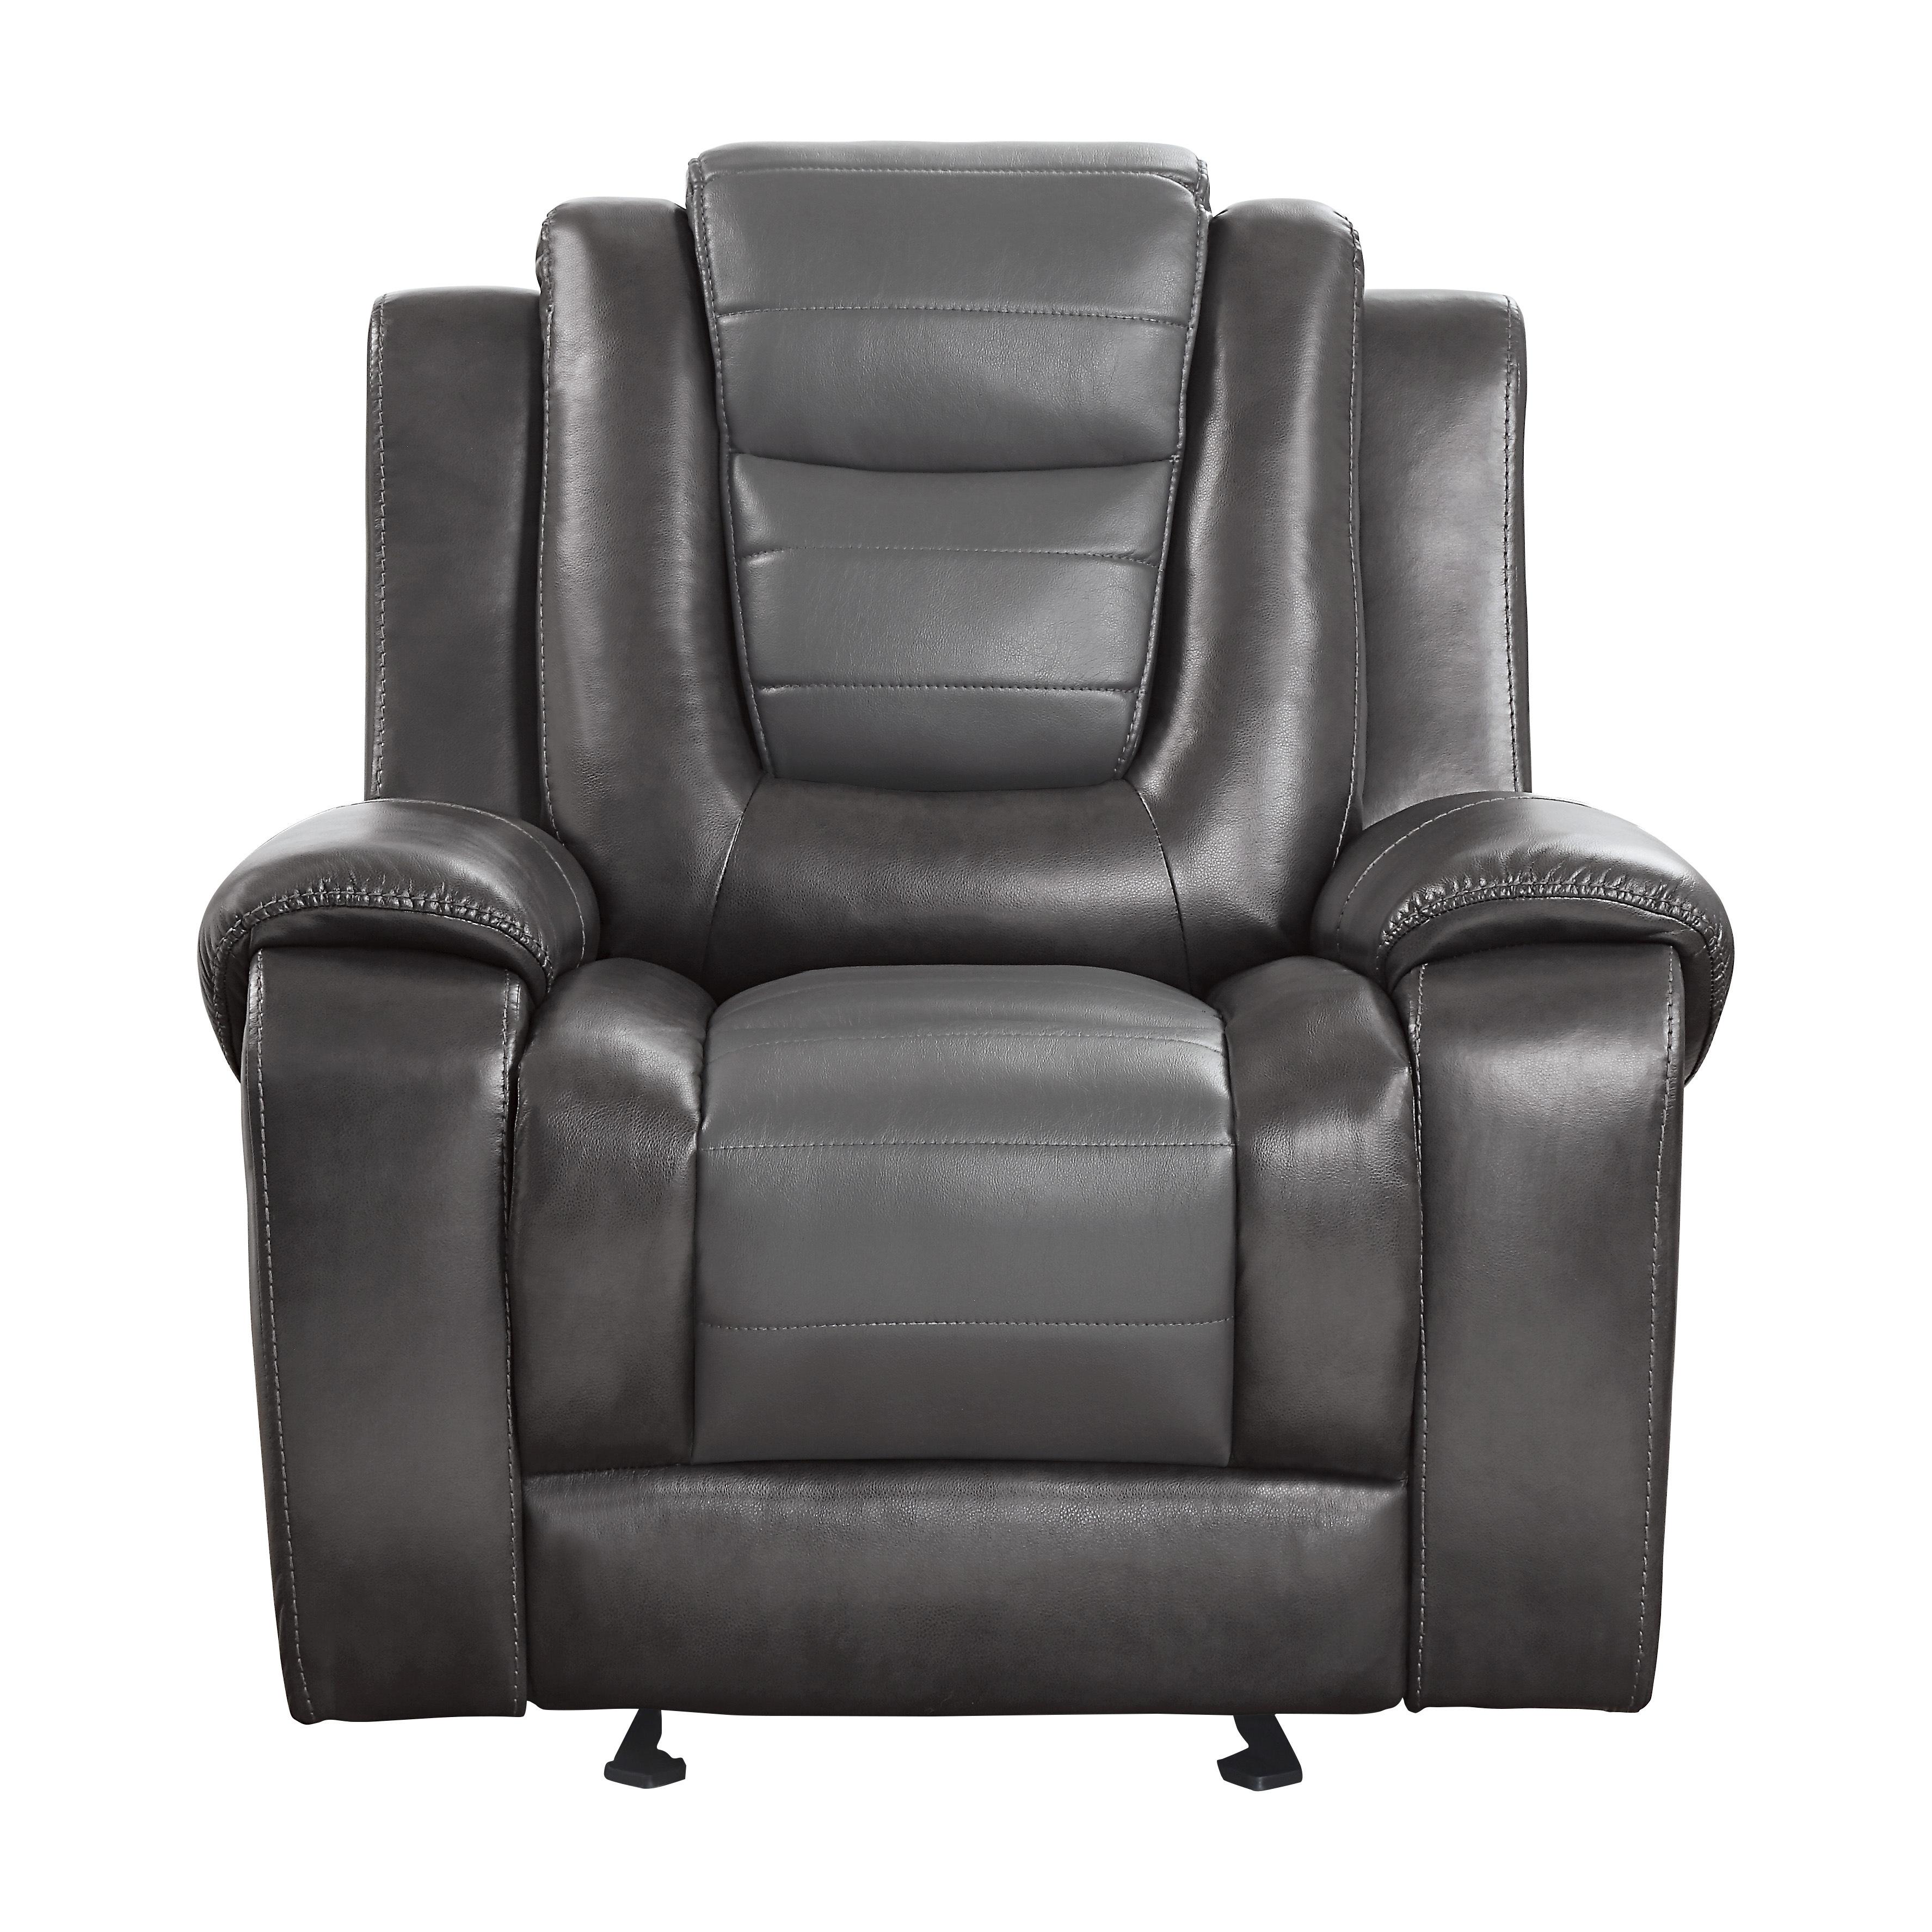 

    
Transitional Dark Gray & Light Gray Faux Leather Reclining Set 3pcs Homelegance 9470GY Briscoe
